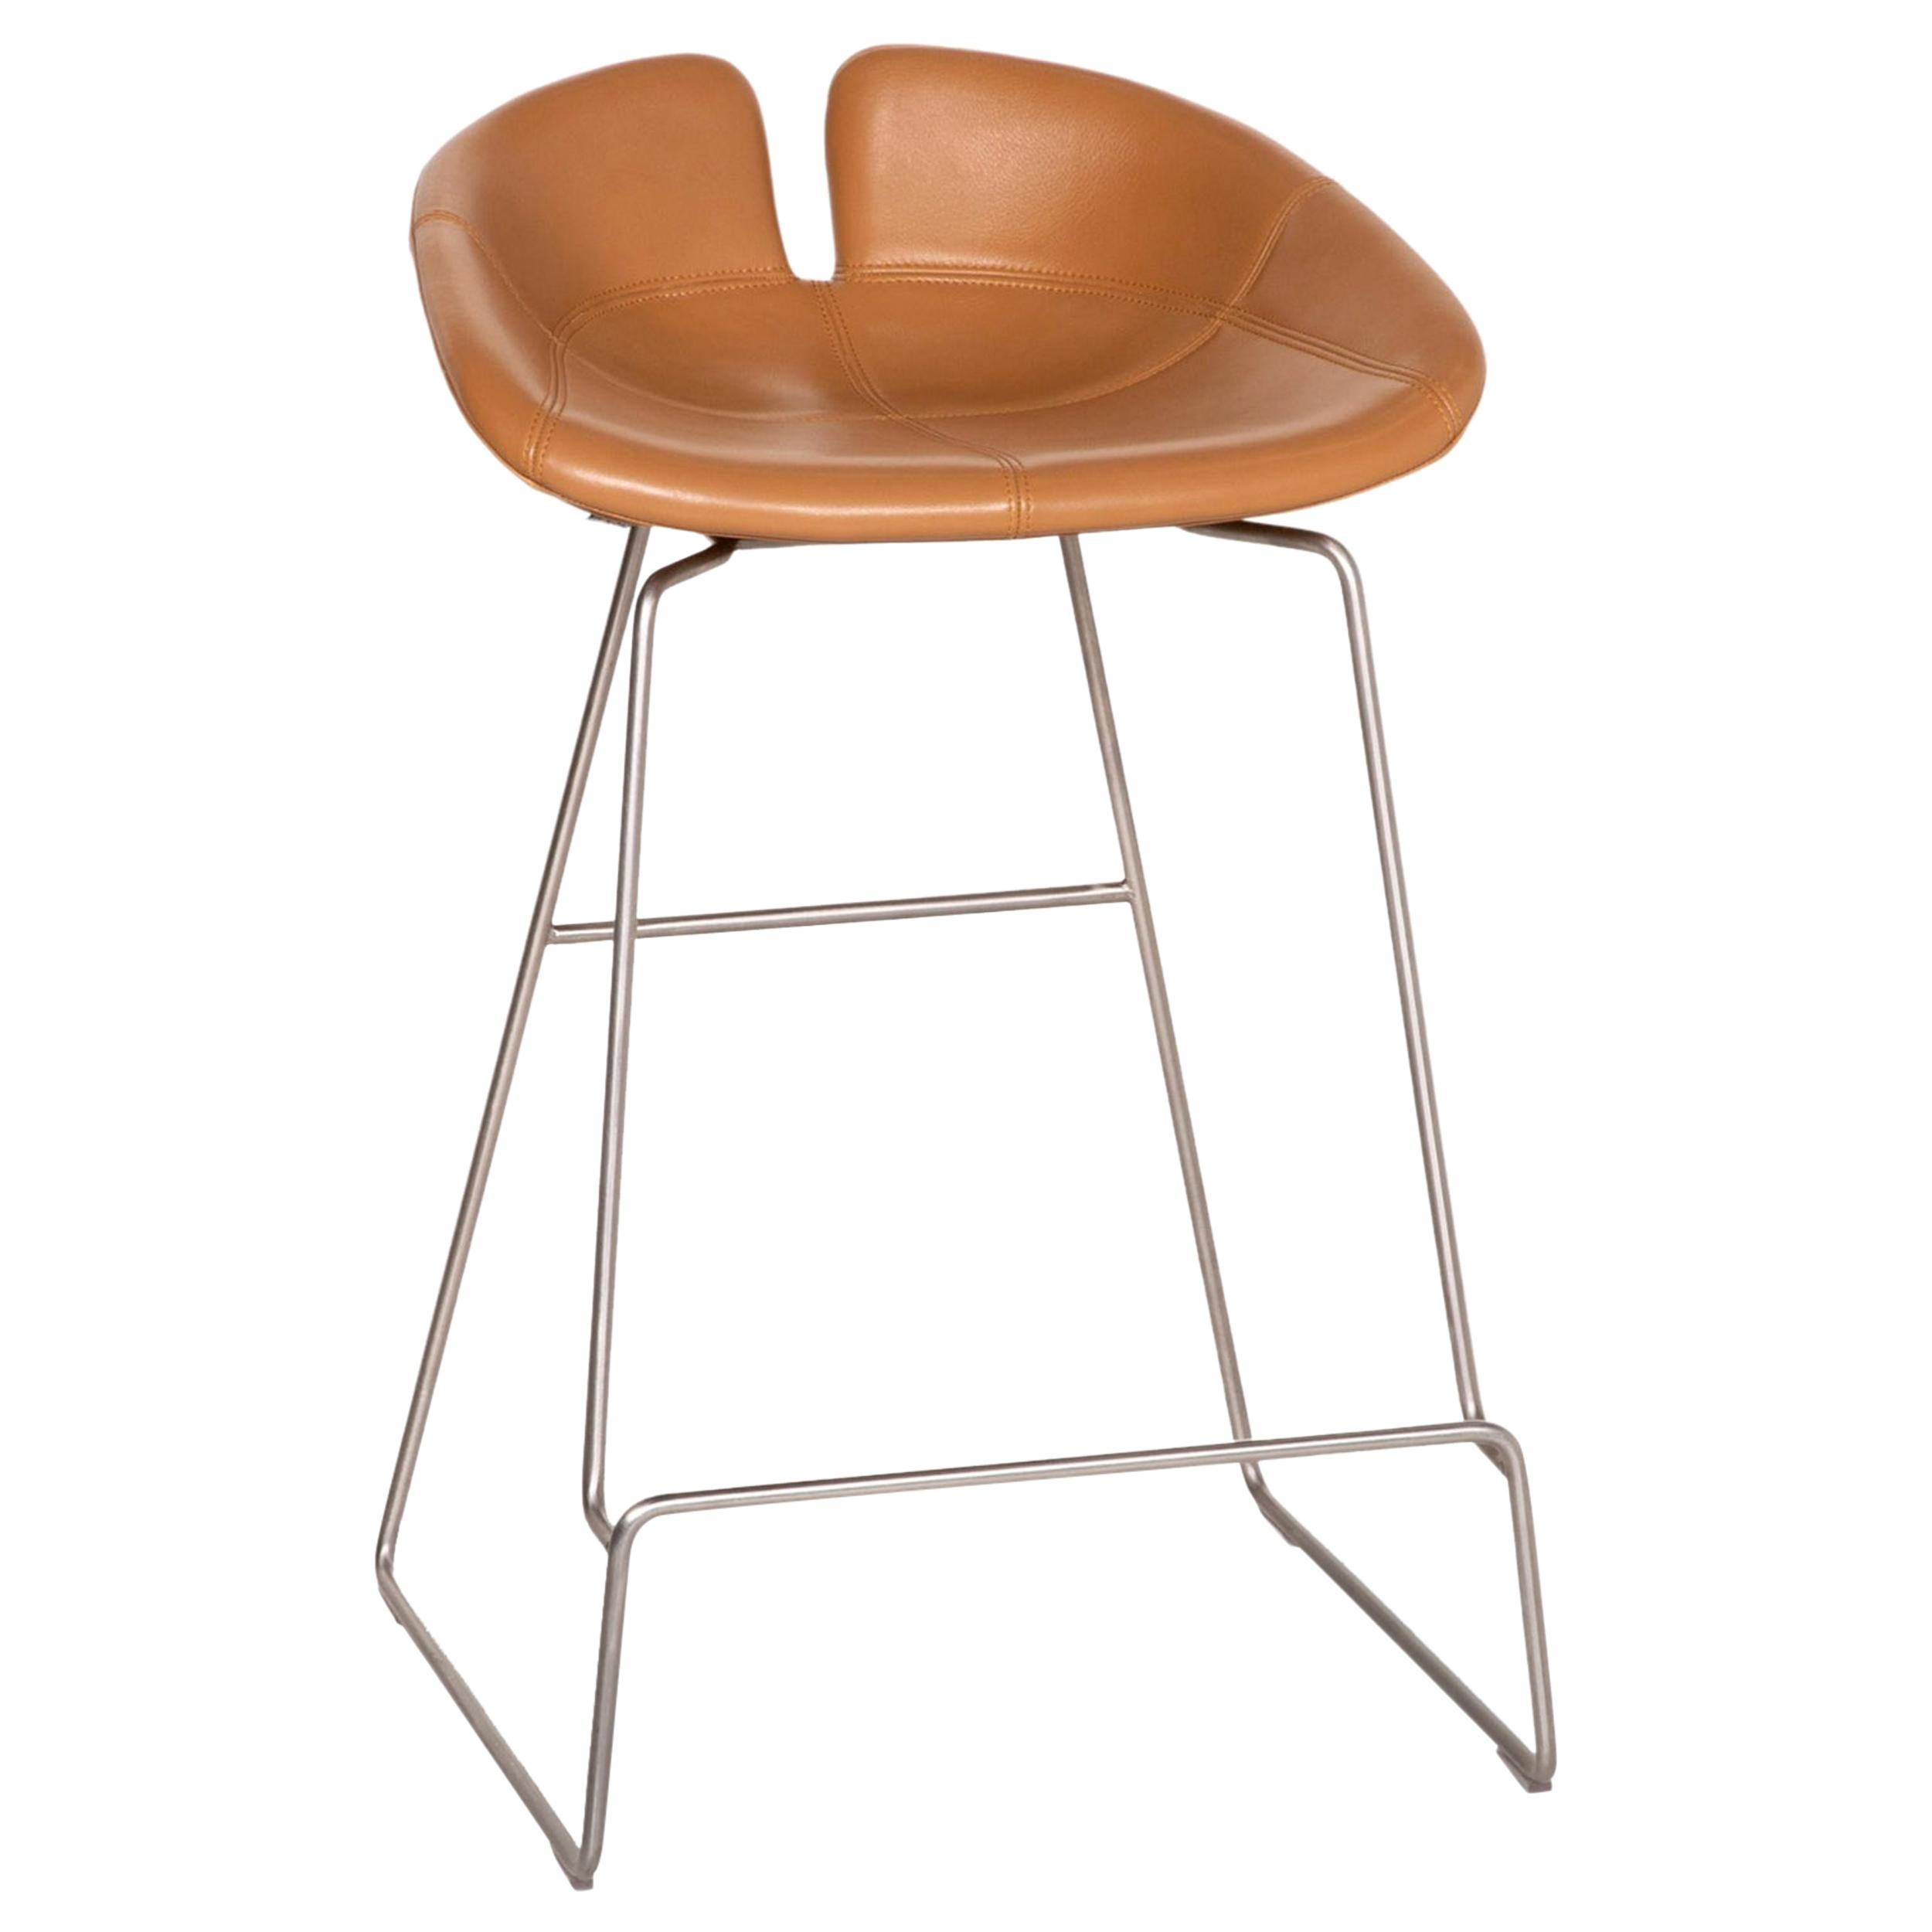 Moroso Fjord Leather Bar Stool Cognac Brown Chair